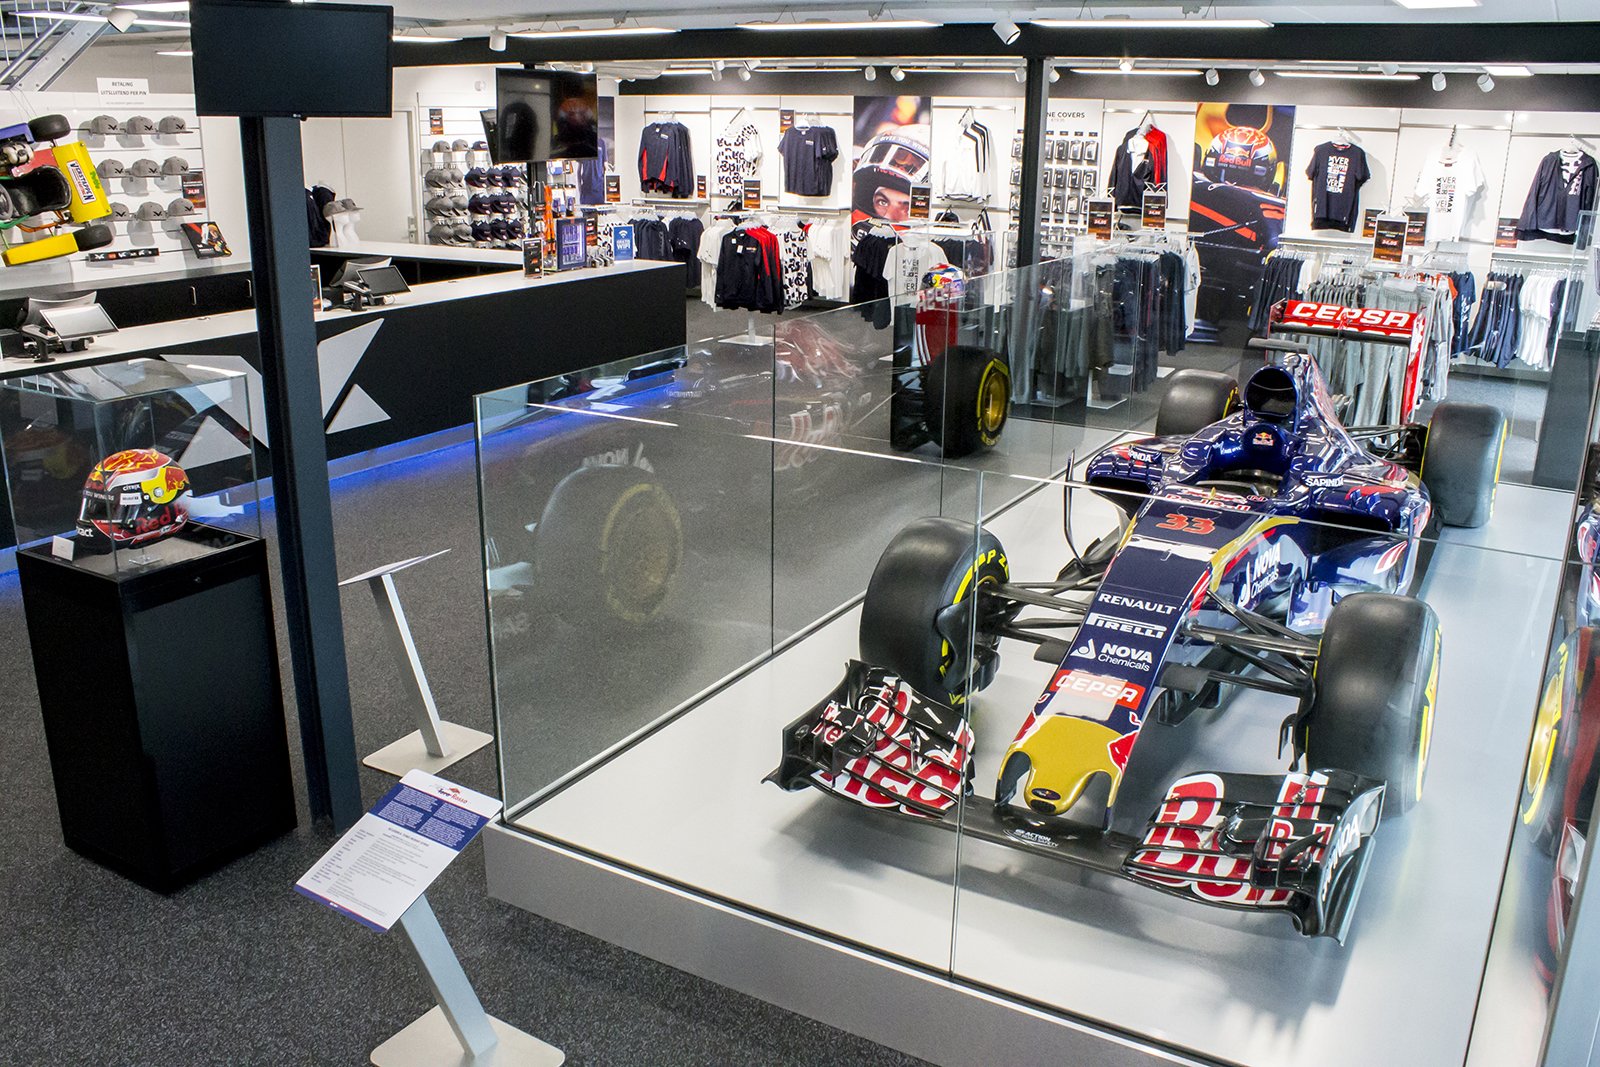 Max Verstappen on Twitter: "Time flies when you're having fun! Today 3 years ago I became the youngest ever to score in Formula 1. The original STR10 is on display at